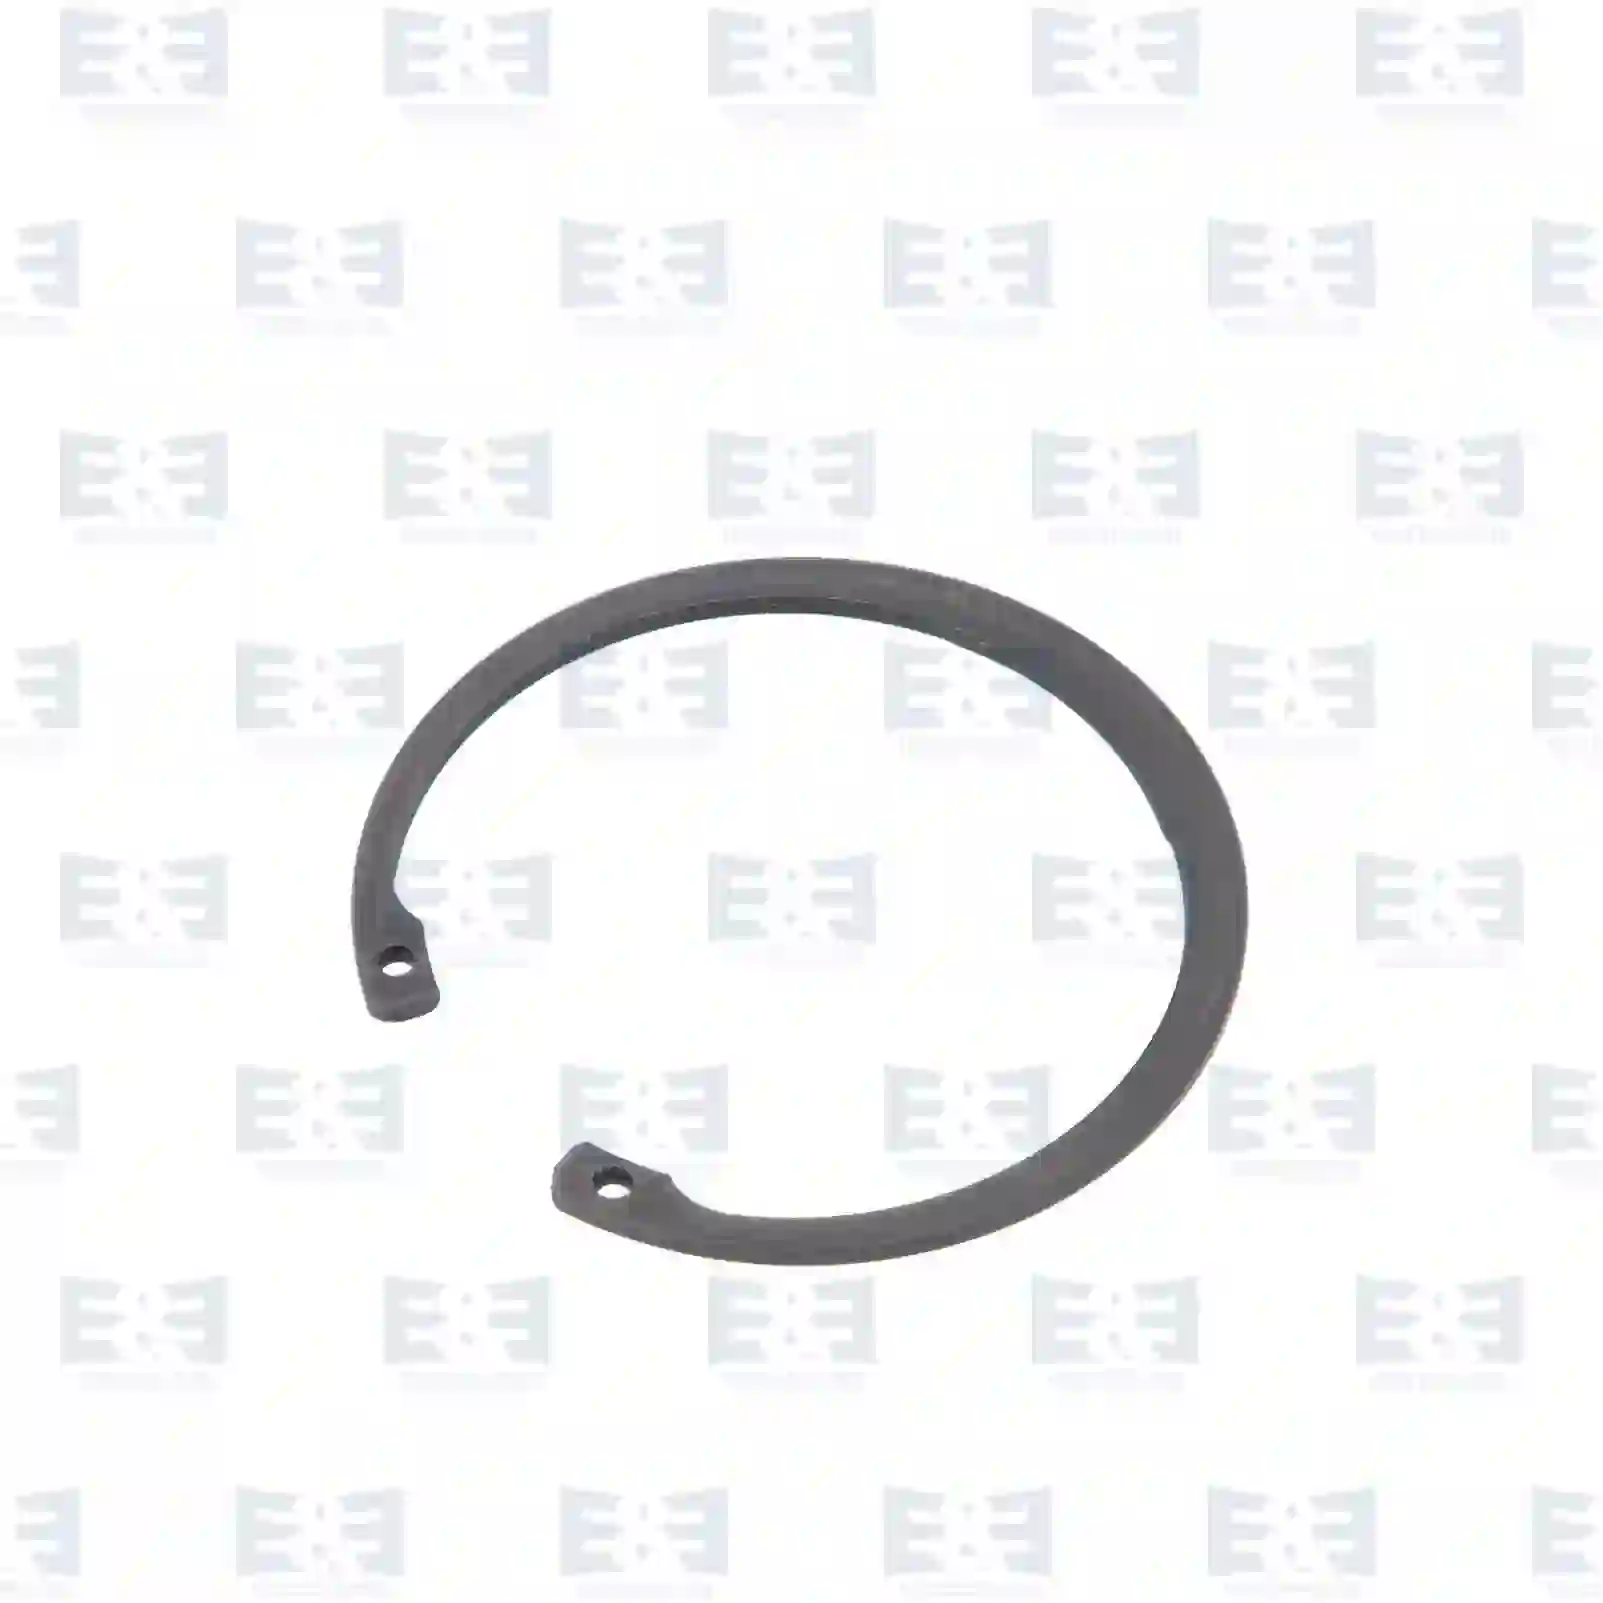 Standard Parts Lock ring, EE No 2E2286203 ,  oem no:07119934749, 06290200204, 34908200004, 81674020388, 87290484400, A0022270580, 000472080000, 804842, 000311361C, N0123501 E&E Truck Spare Parts | Truck Spare Parts, Auotomotive Spare Parts